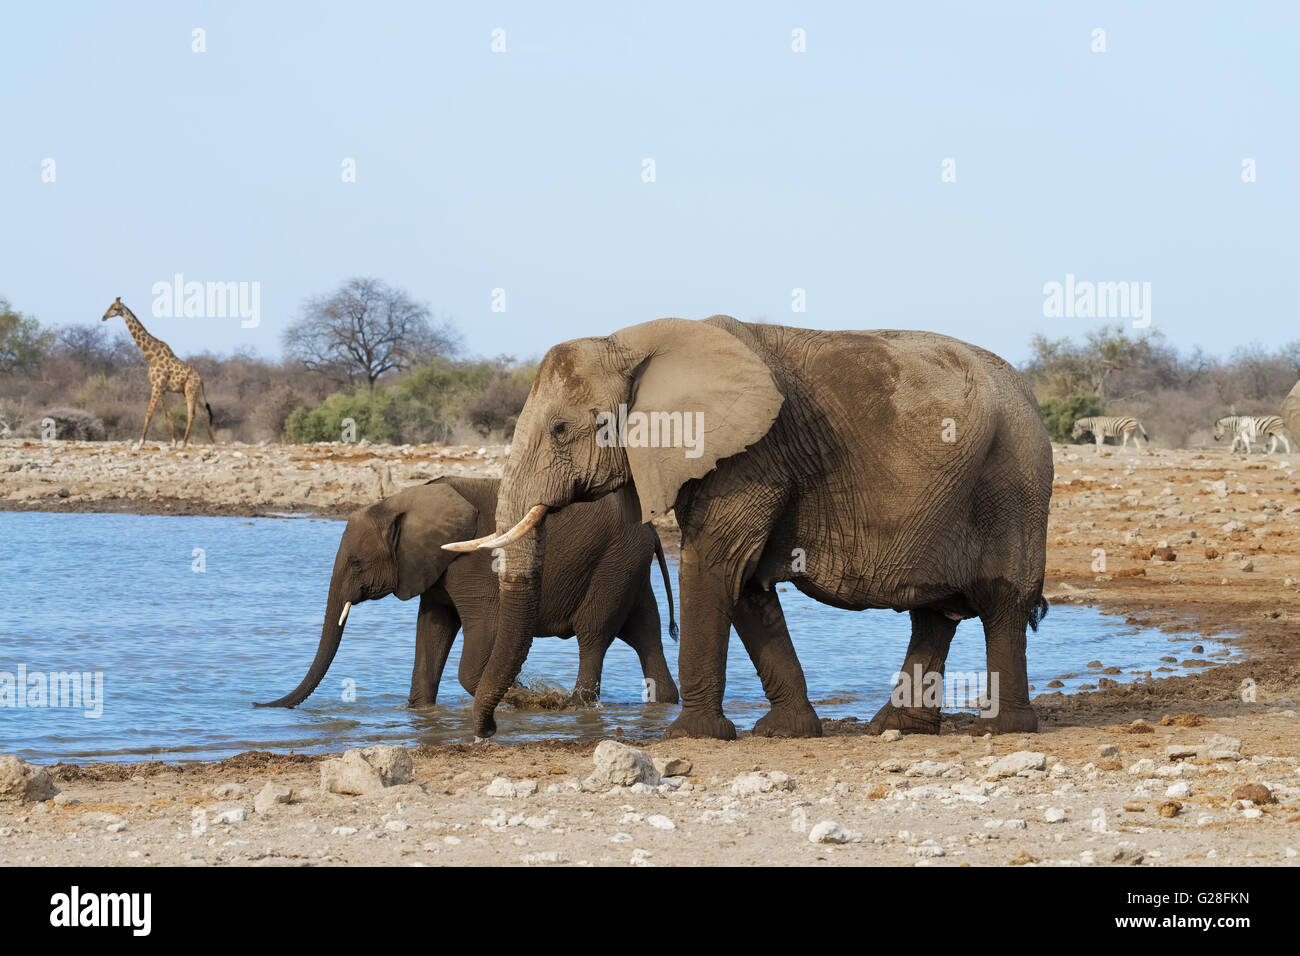 Female elephant with her calf drinking and bathing at a waterhole in Etosha National Park, Namibia Stock Photo